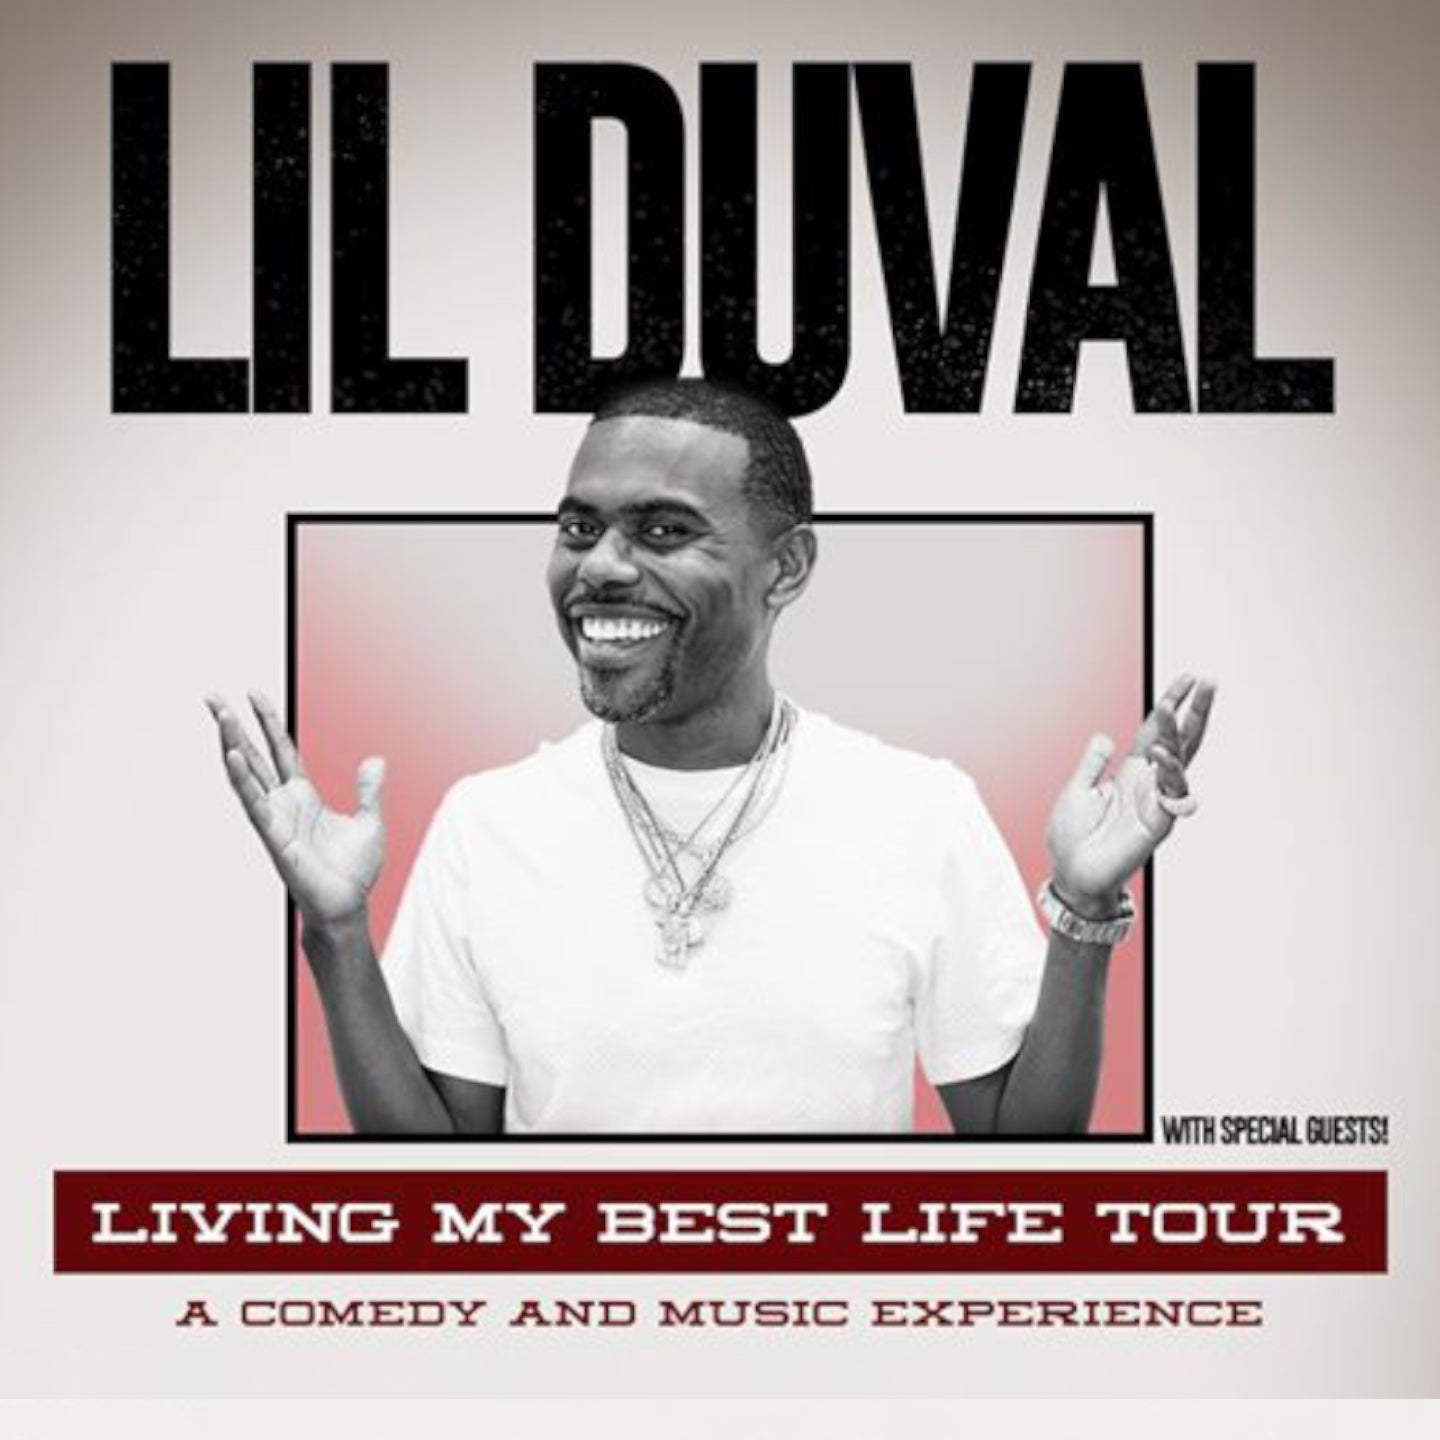 Lil Duval: Living My Best Life Tour